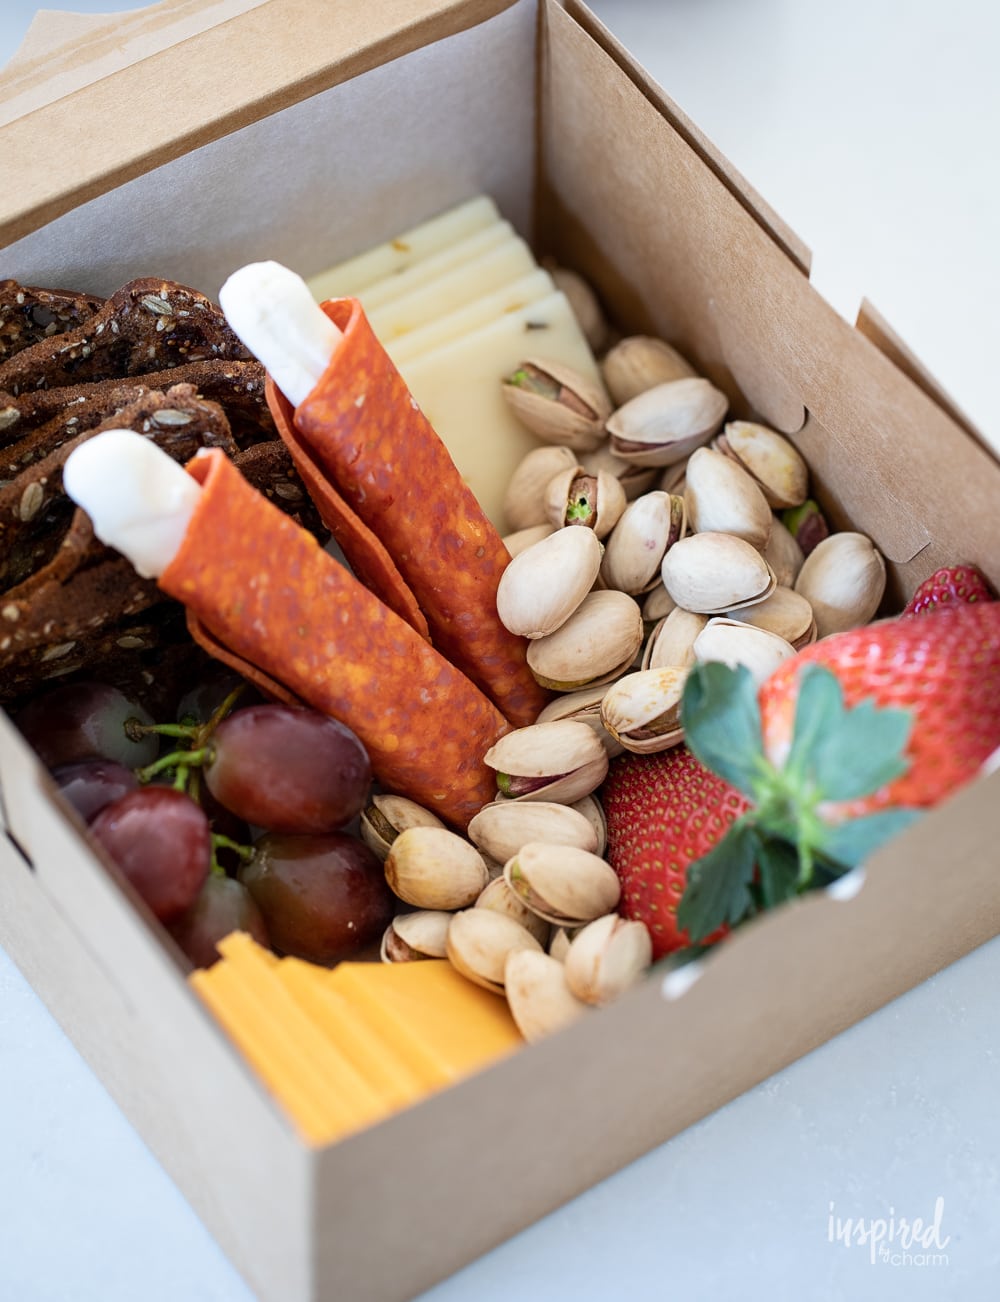 filling a charcuterie box with meats, cheeses, and nuts.